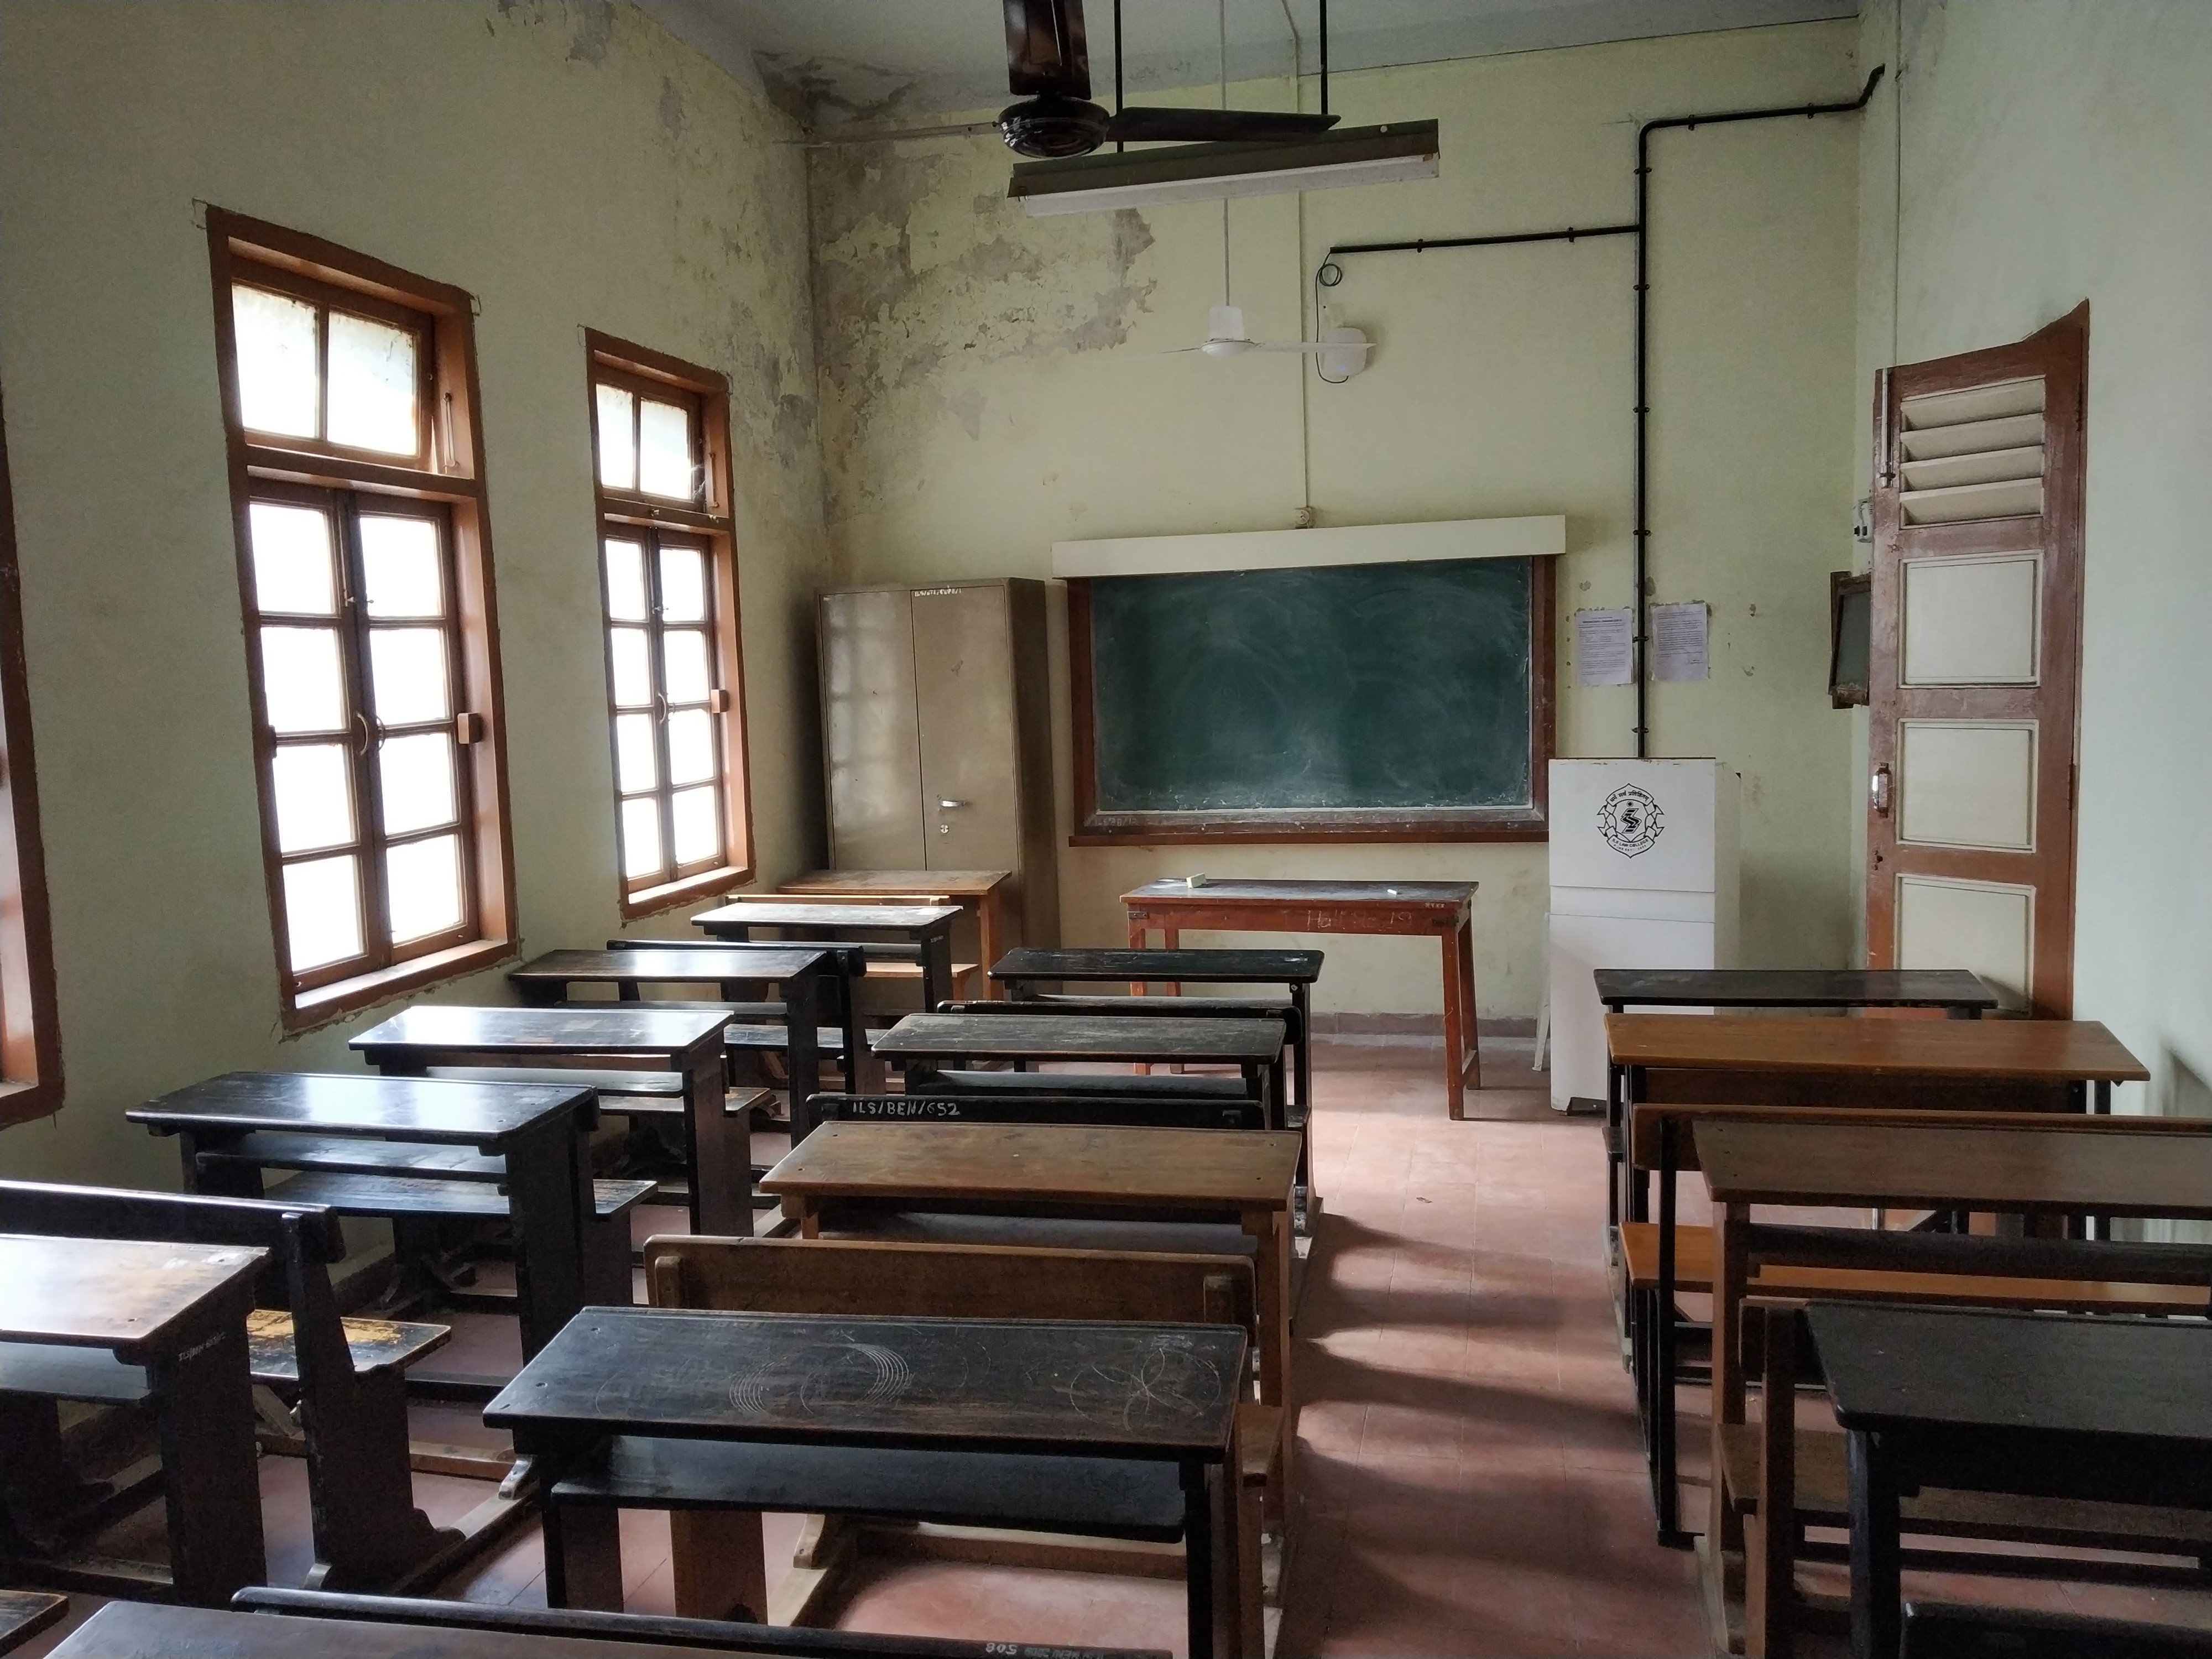 ICT enabled Hall No.17